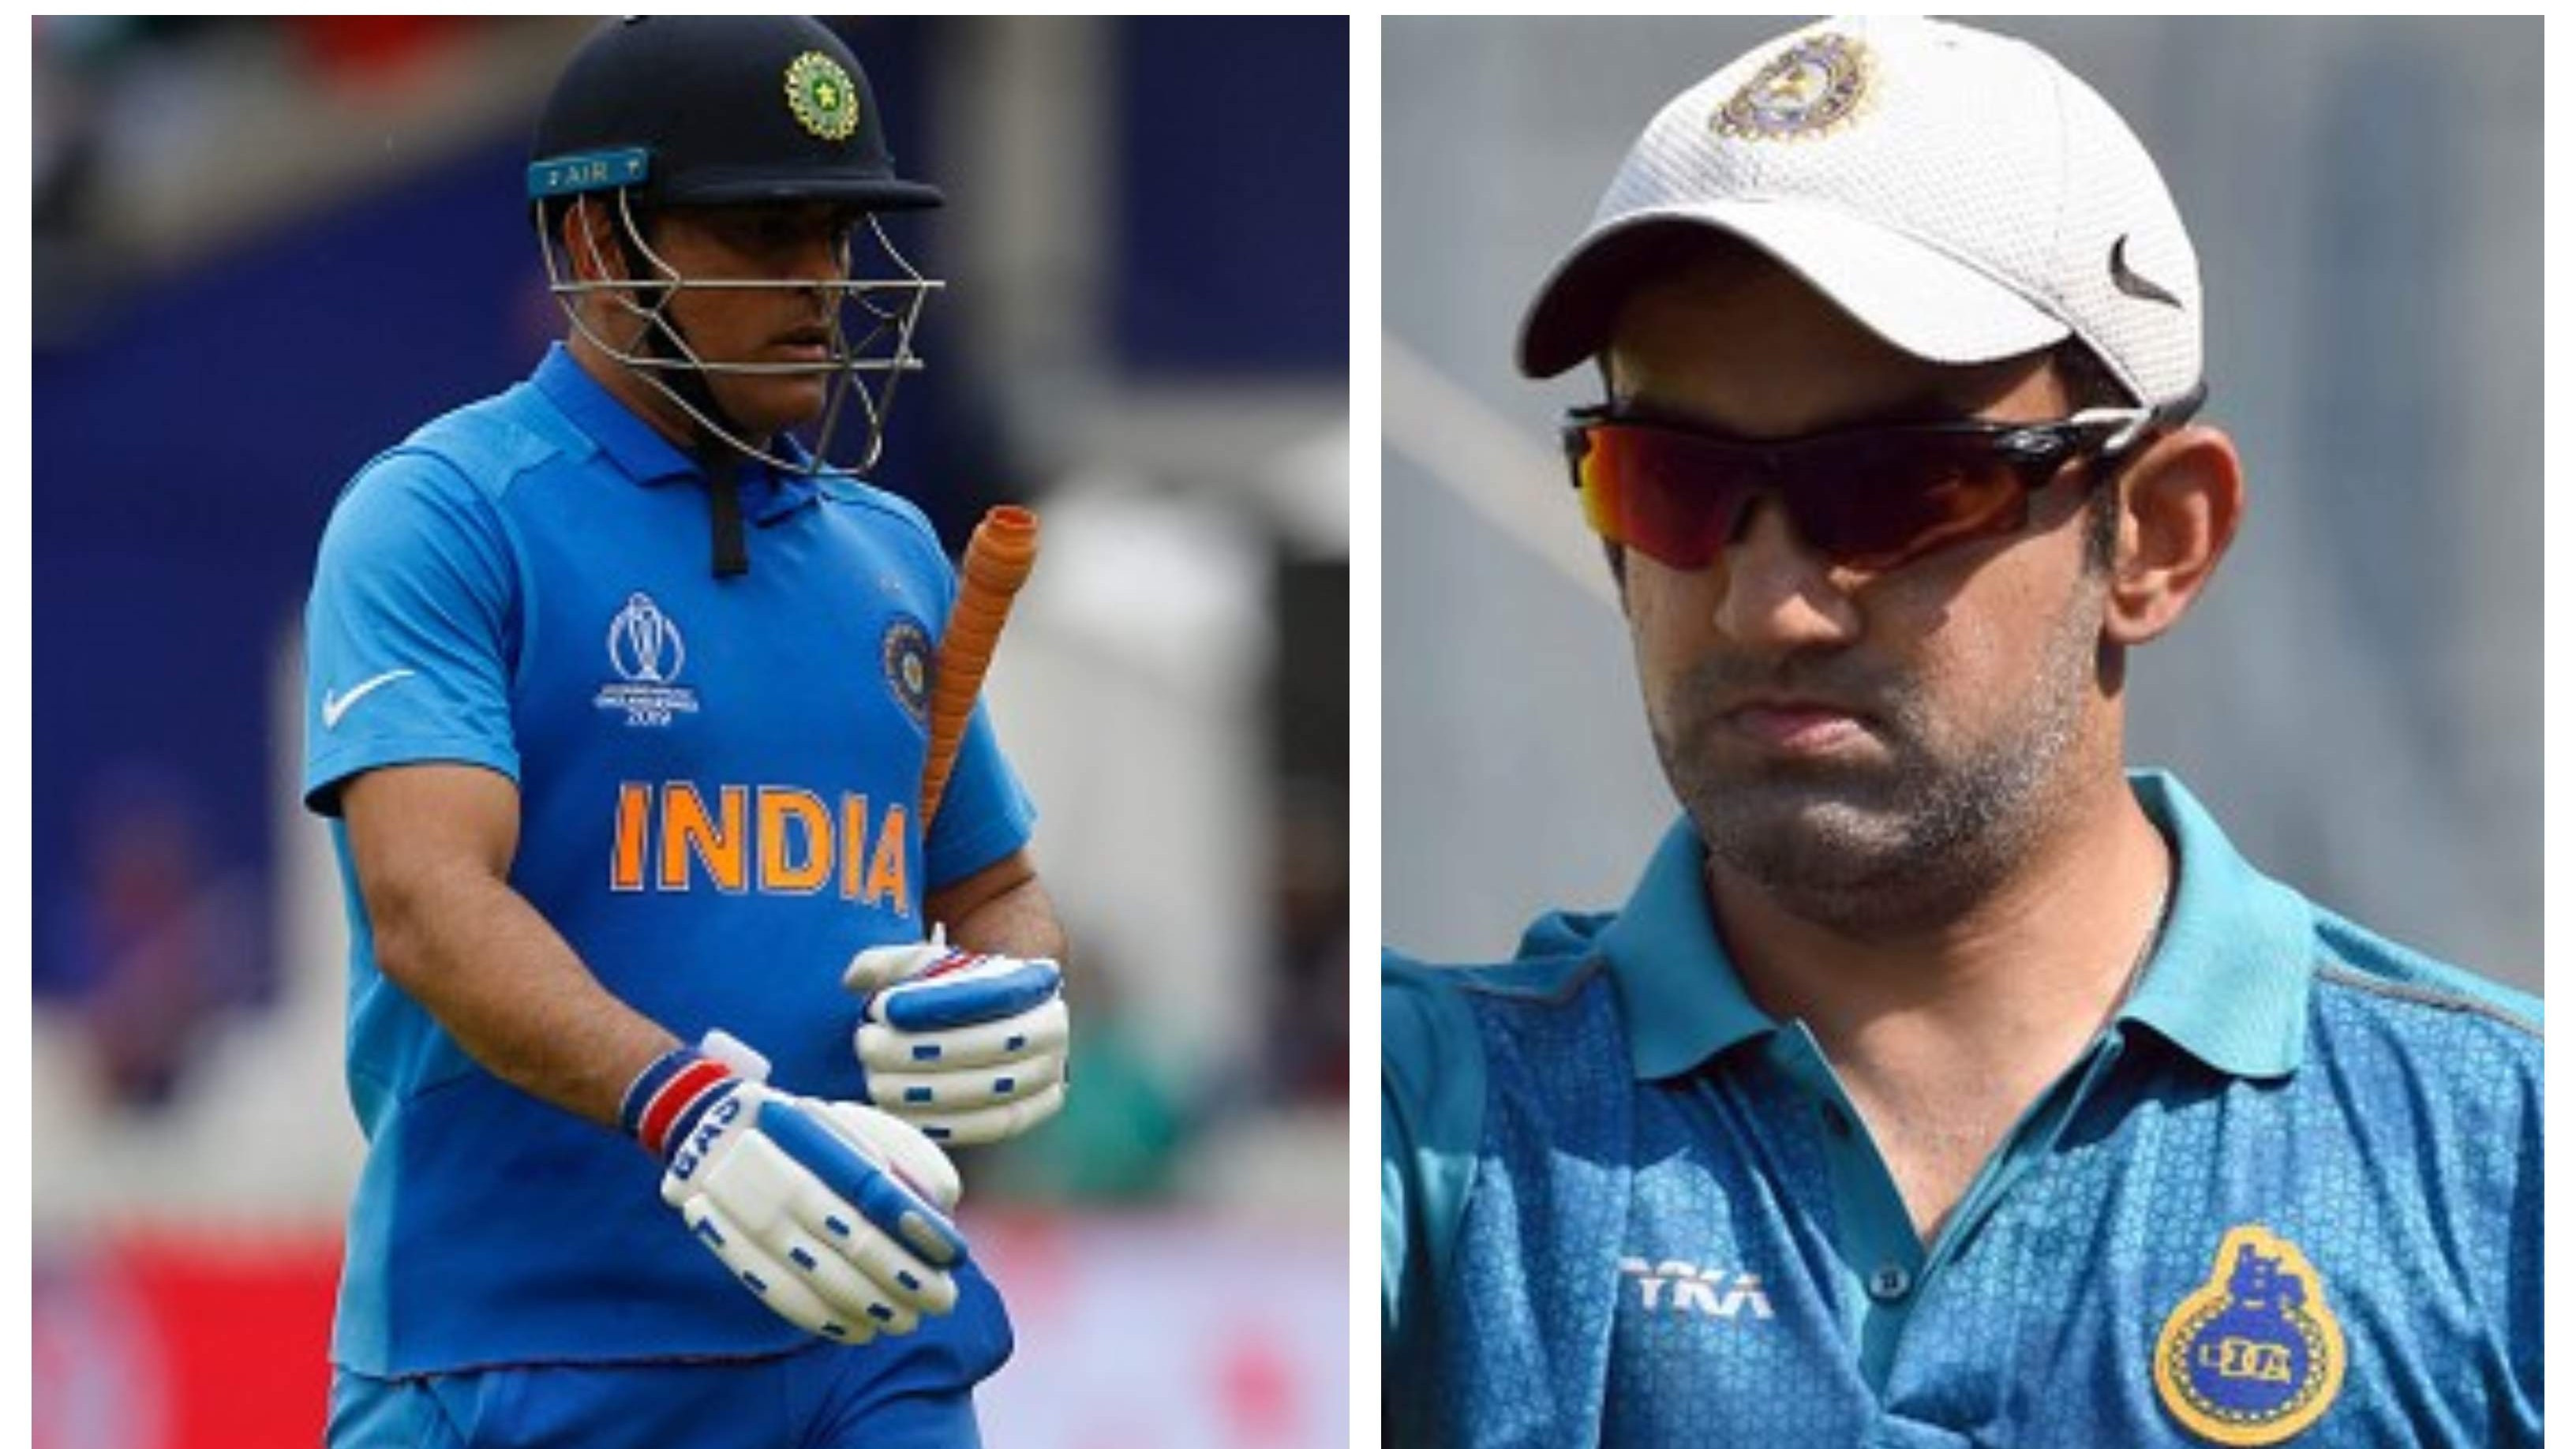 IPL 2020: ‘Dhoni's chances for India comeback look dim if IPL gets cancelled’ – Gambhir